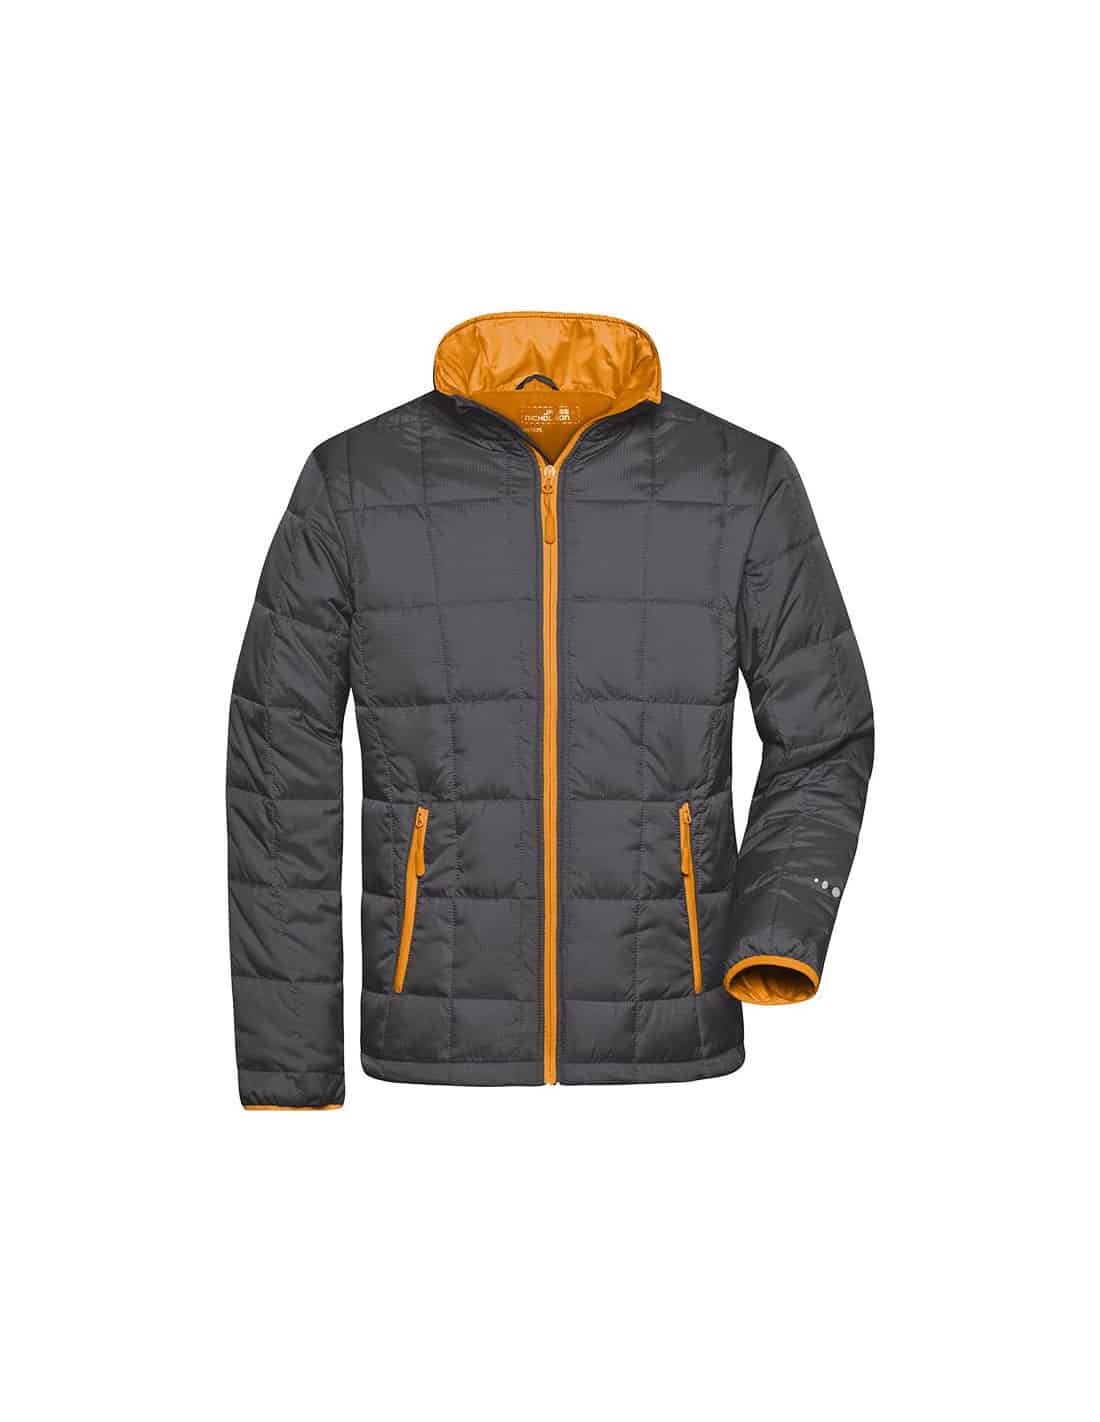 FLOSO - Cagoule thermique Thinsulate - Homme